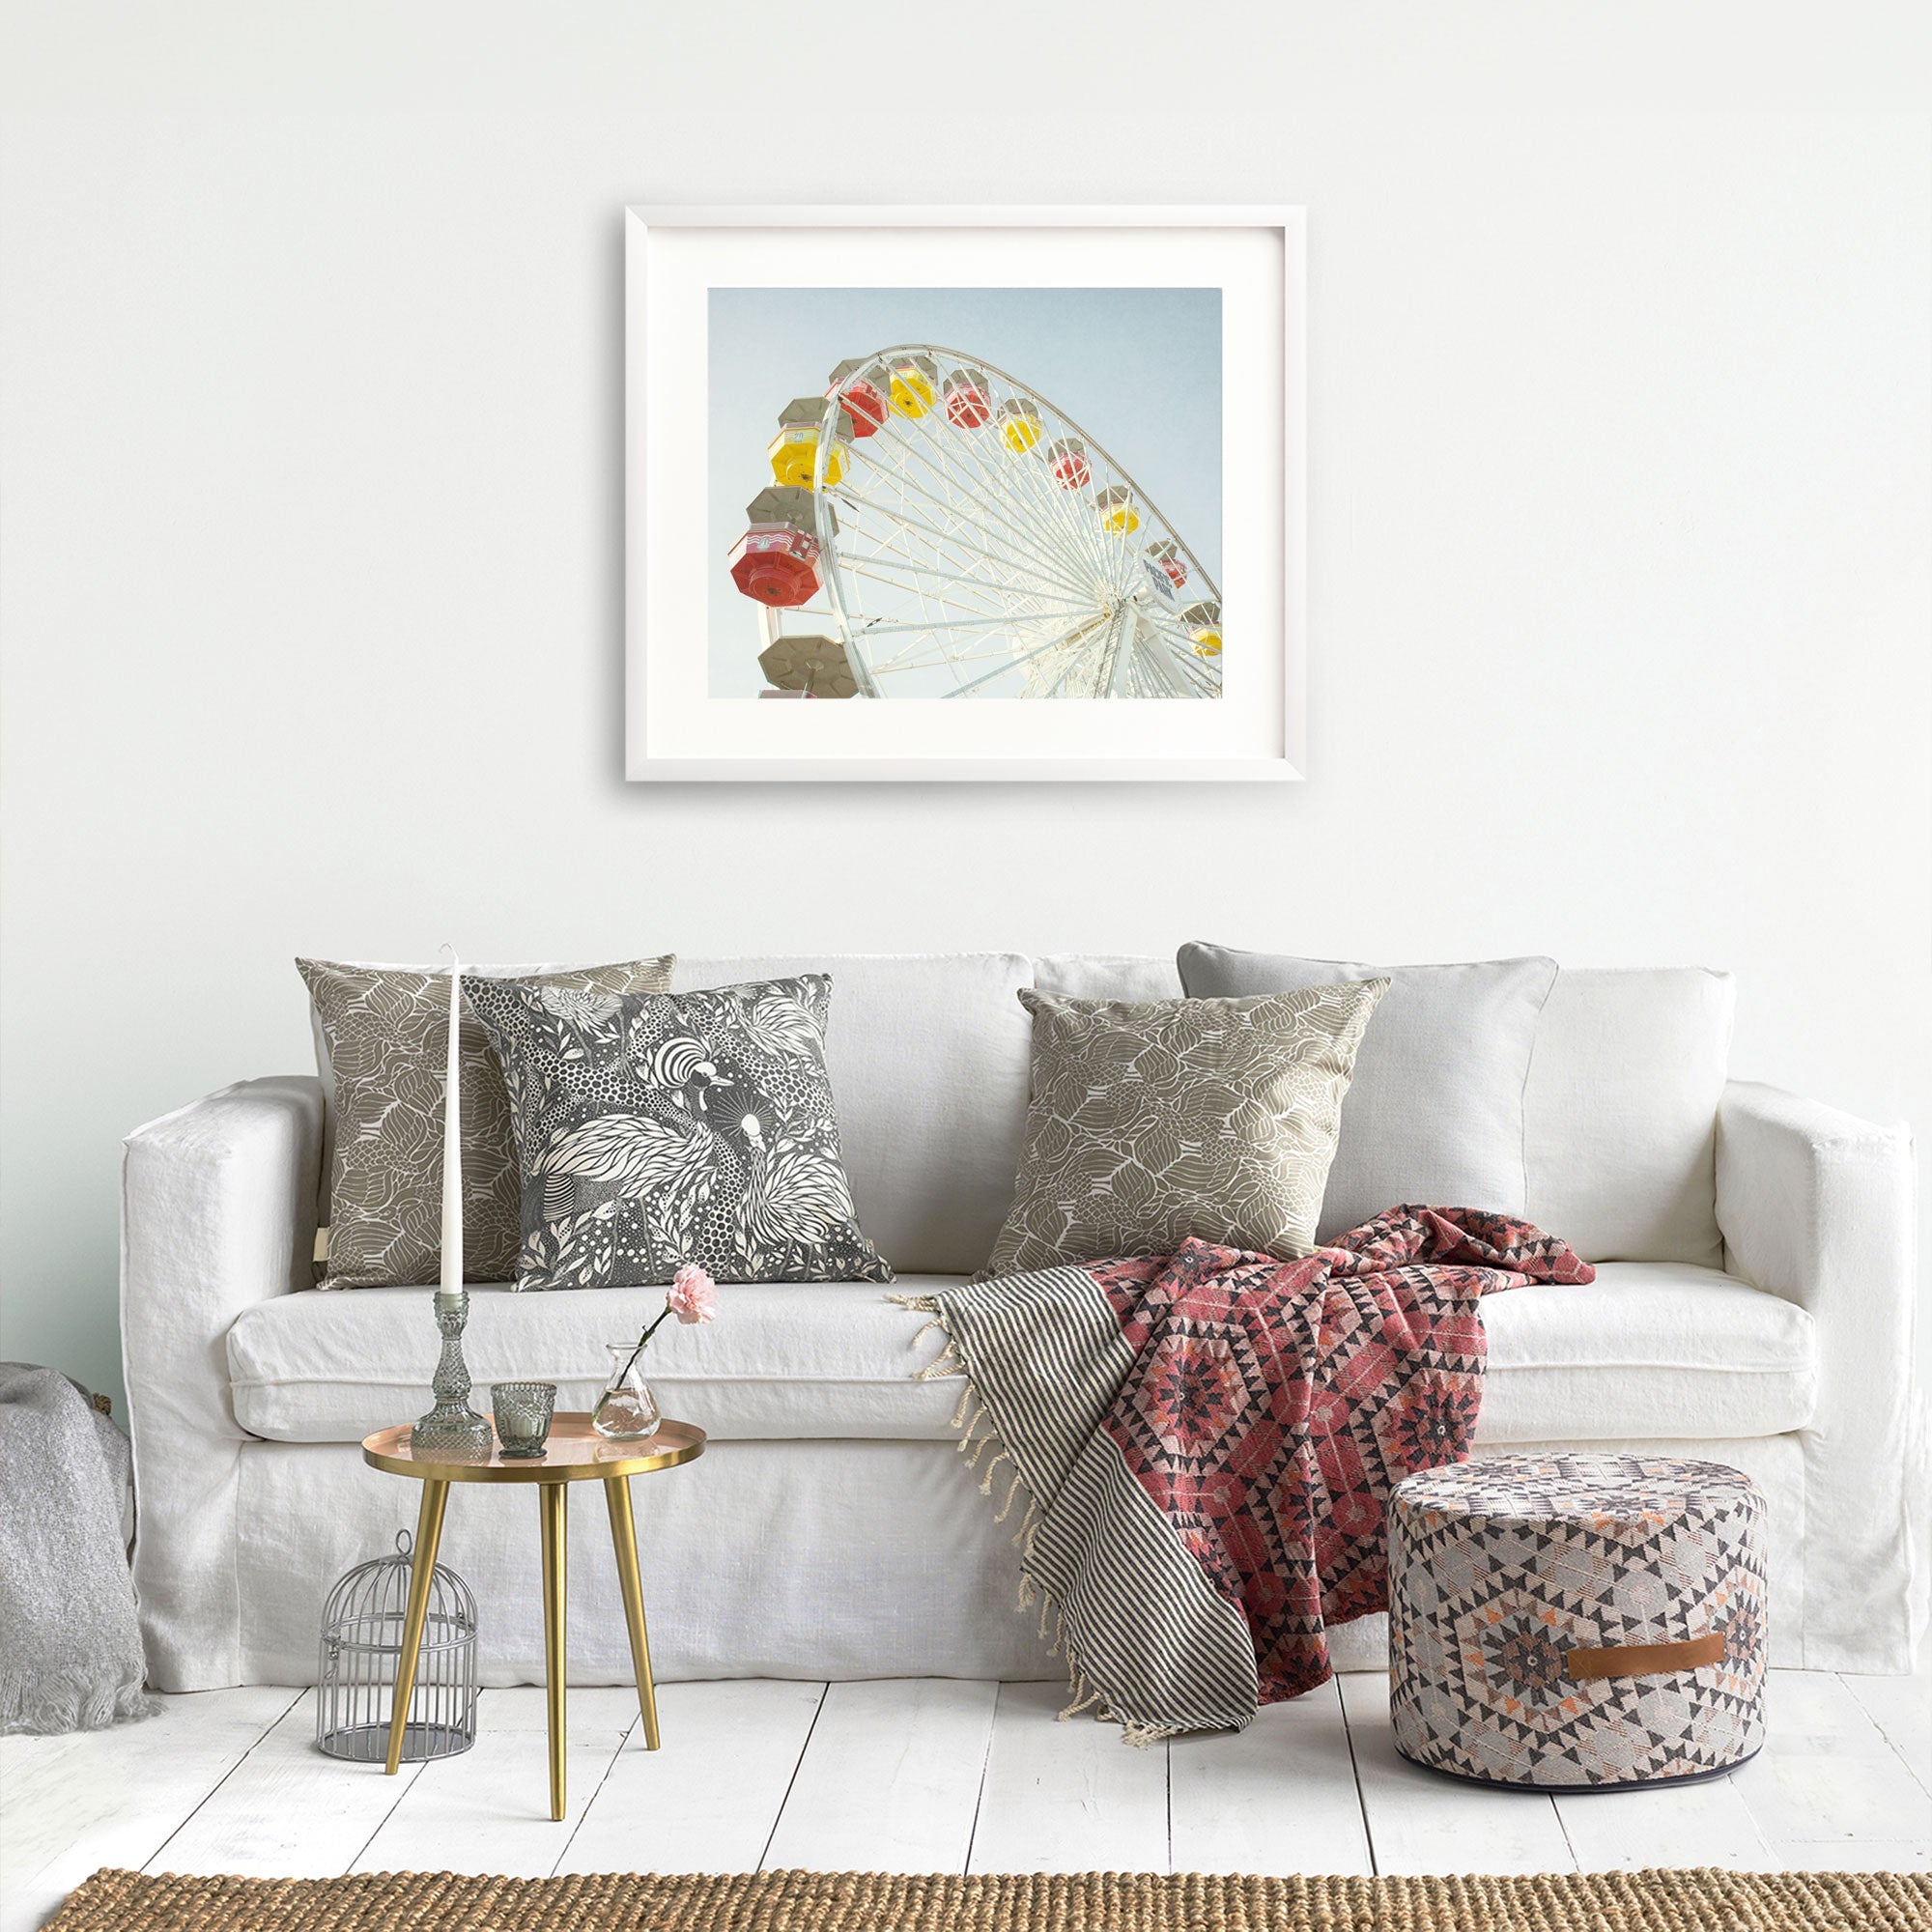 A cozy living room corner with a white sofa adorned with patterned cushions, a red throw blanket, and a small round gold table with a pink rose in a vase. A framed picture of the Offley Green Santa Monica Ferris Wheel Print, &#39;Ferris Above&#39;